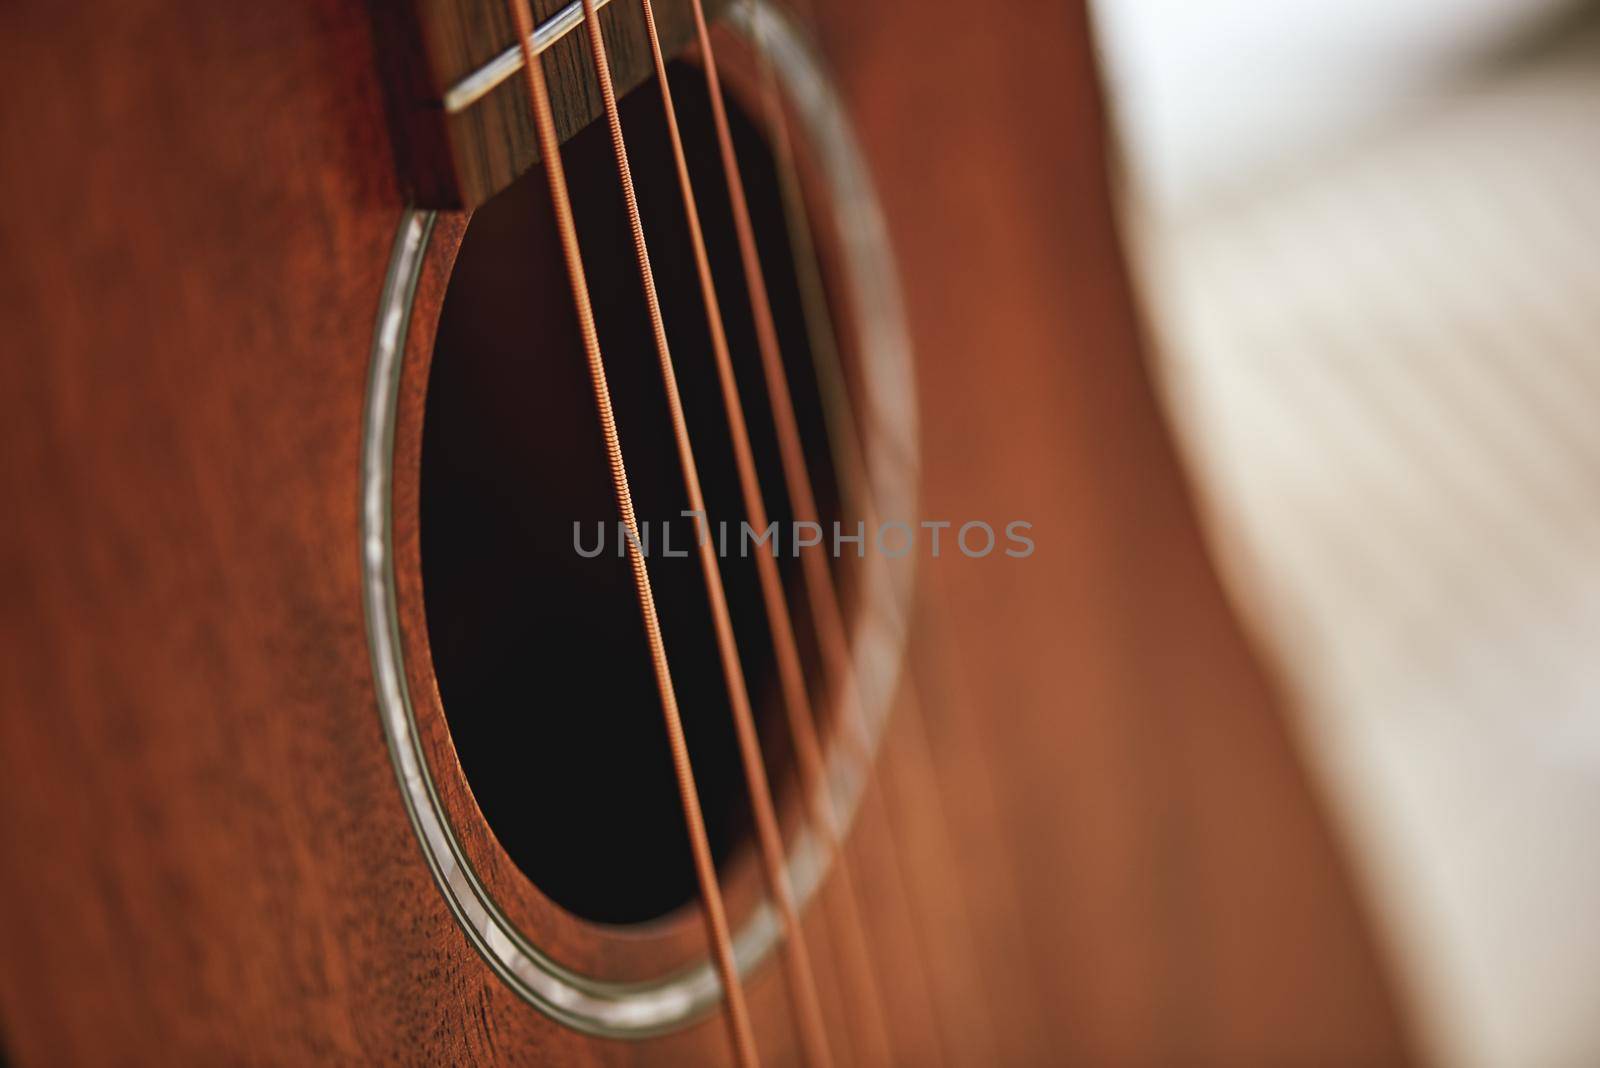 Get to know your instrument. Close up photo of acoustic guitar sound hole. Music equipment. Musical instruments. Music concept